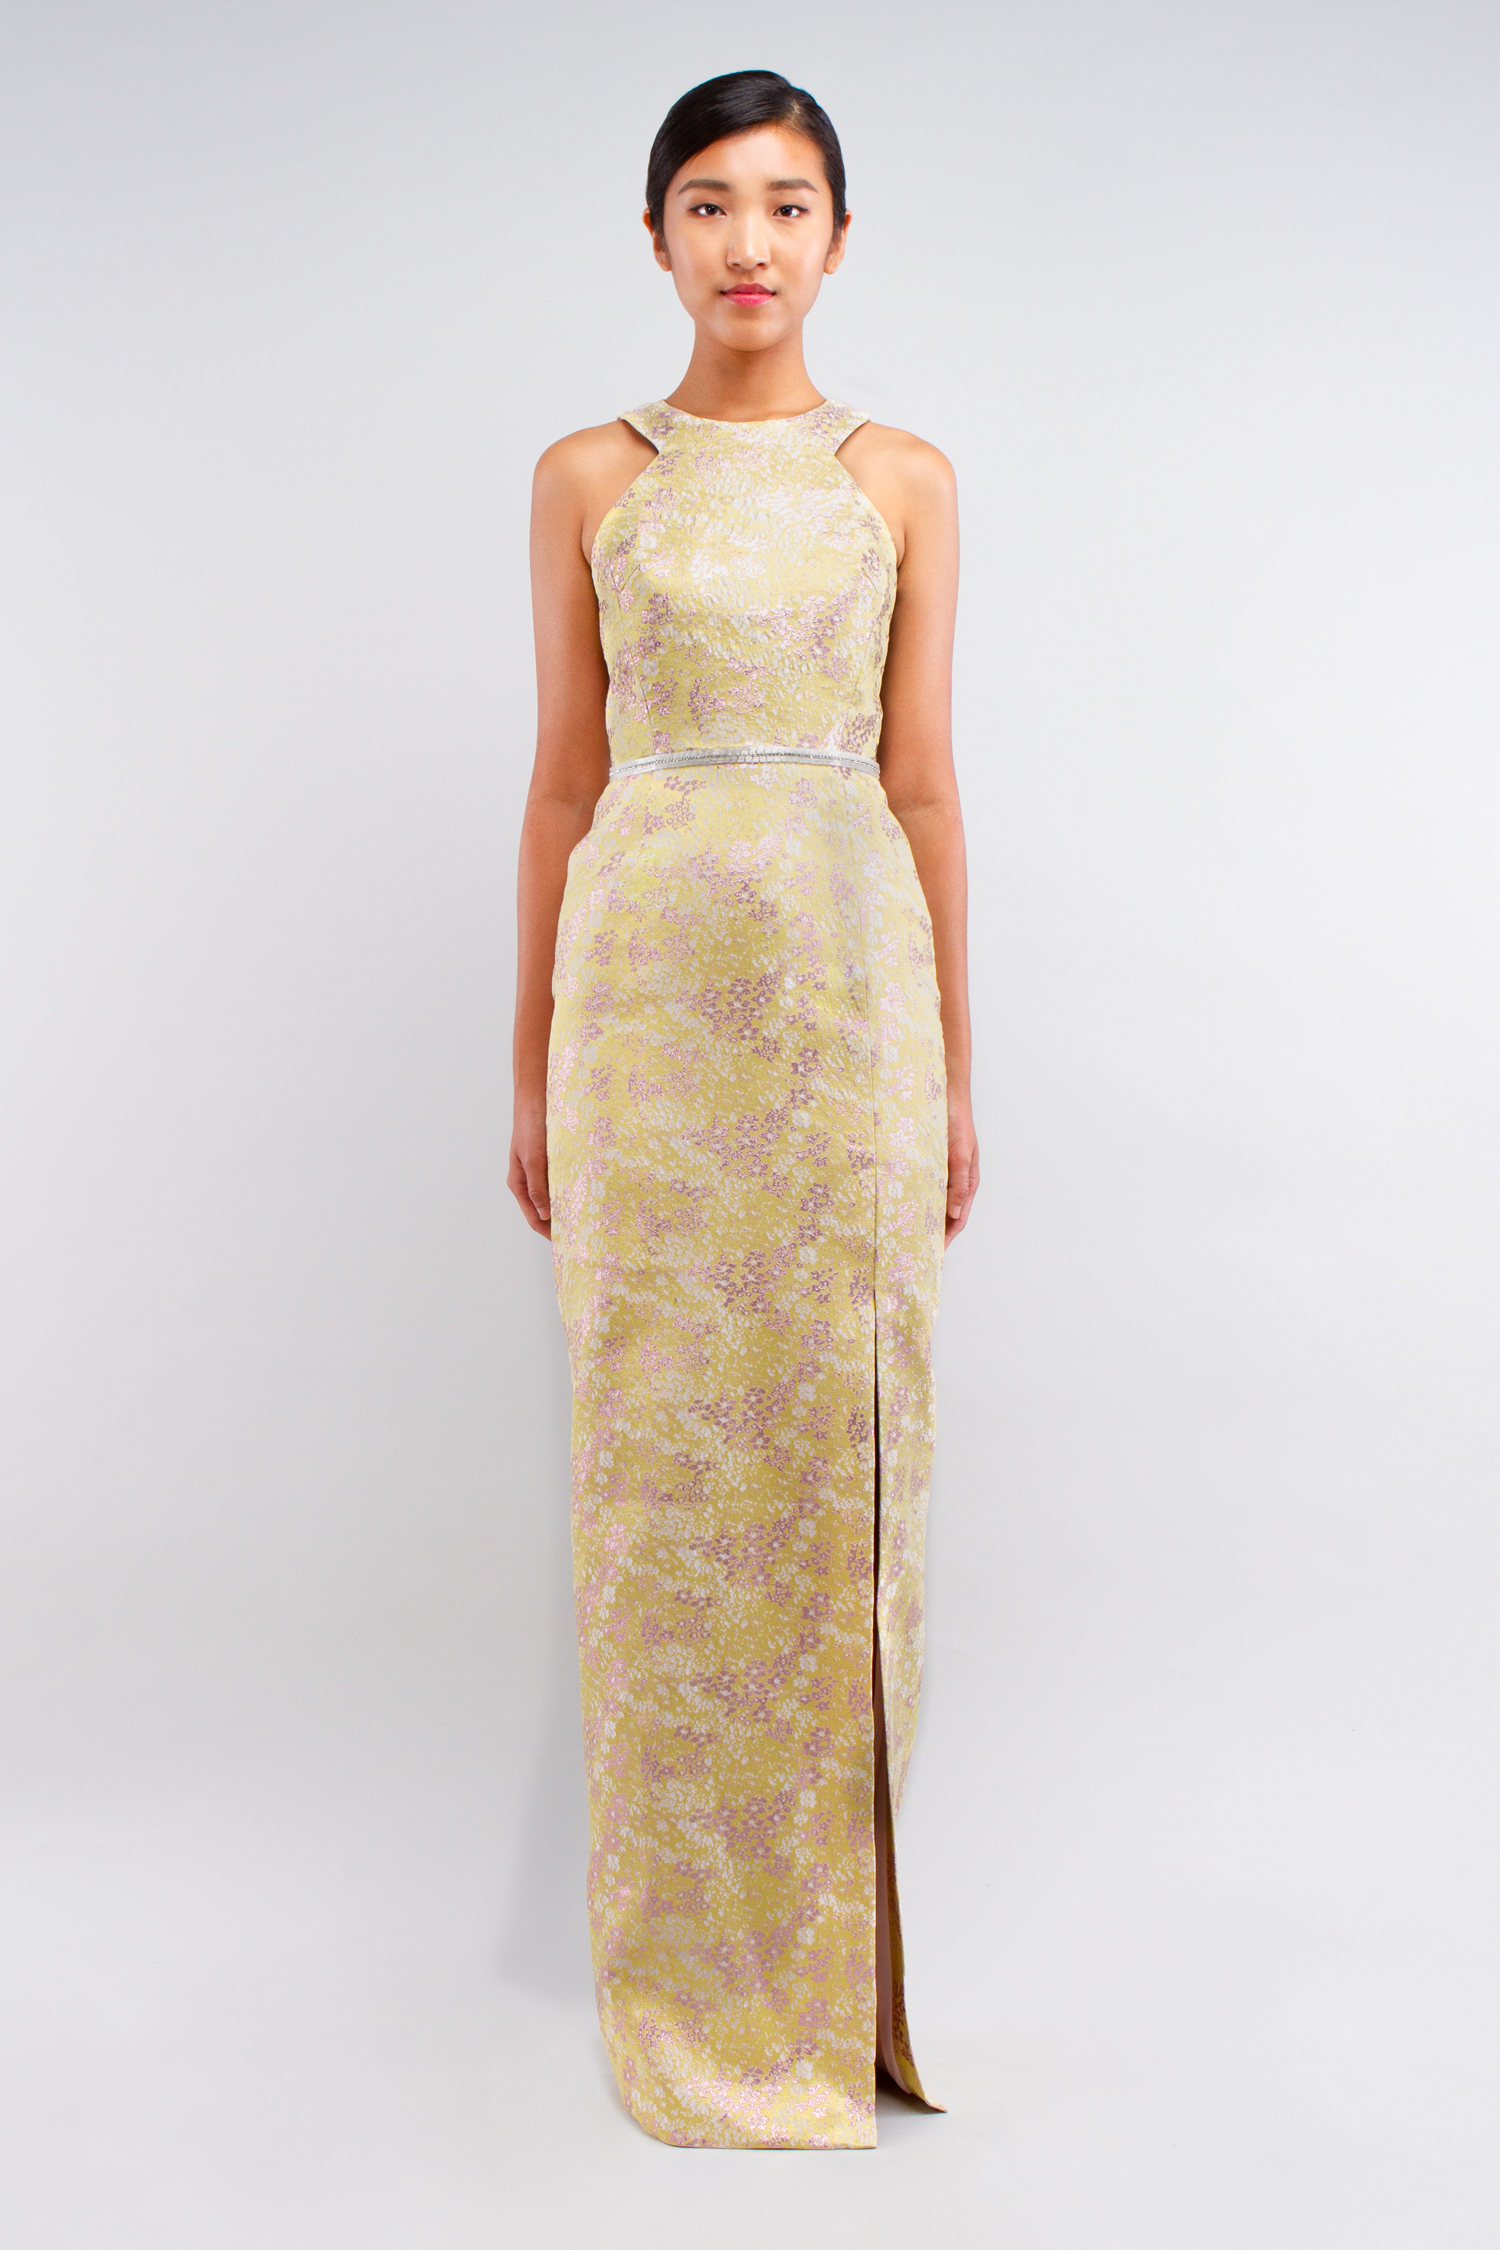 Long column gown dress with cut-out neckline and embroidered belt - Believe Look 2 - Verdin New York